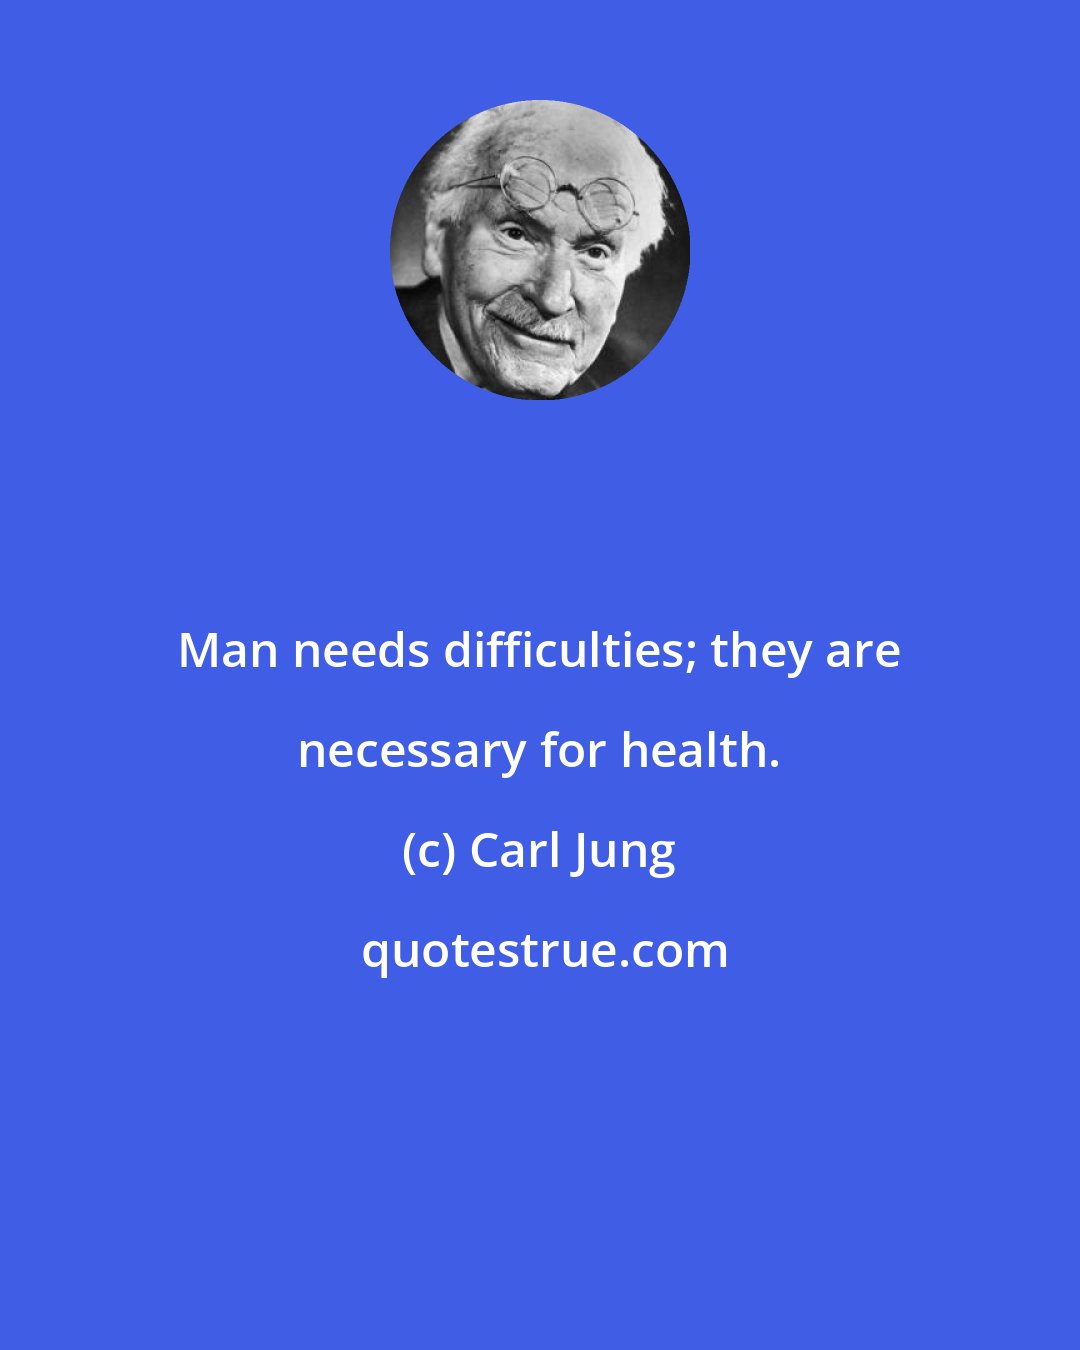 Carl Jung: Man needs difficulties; they are necessary for health.